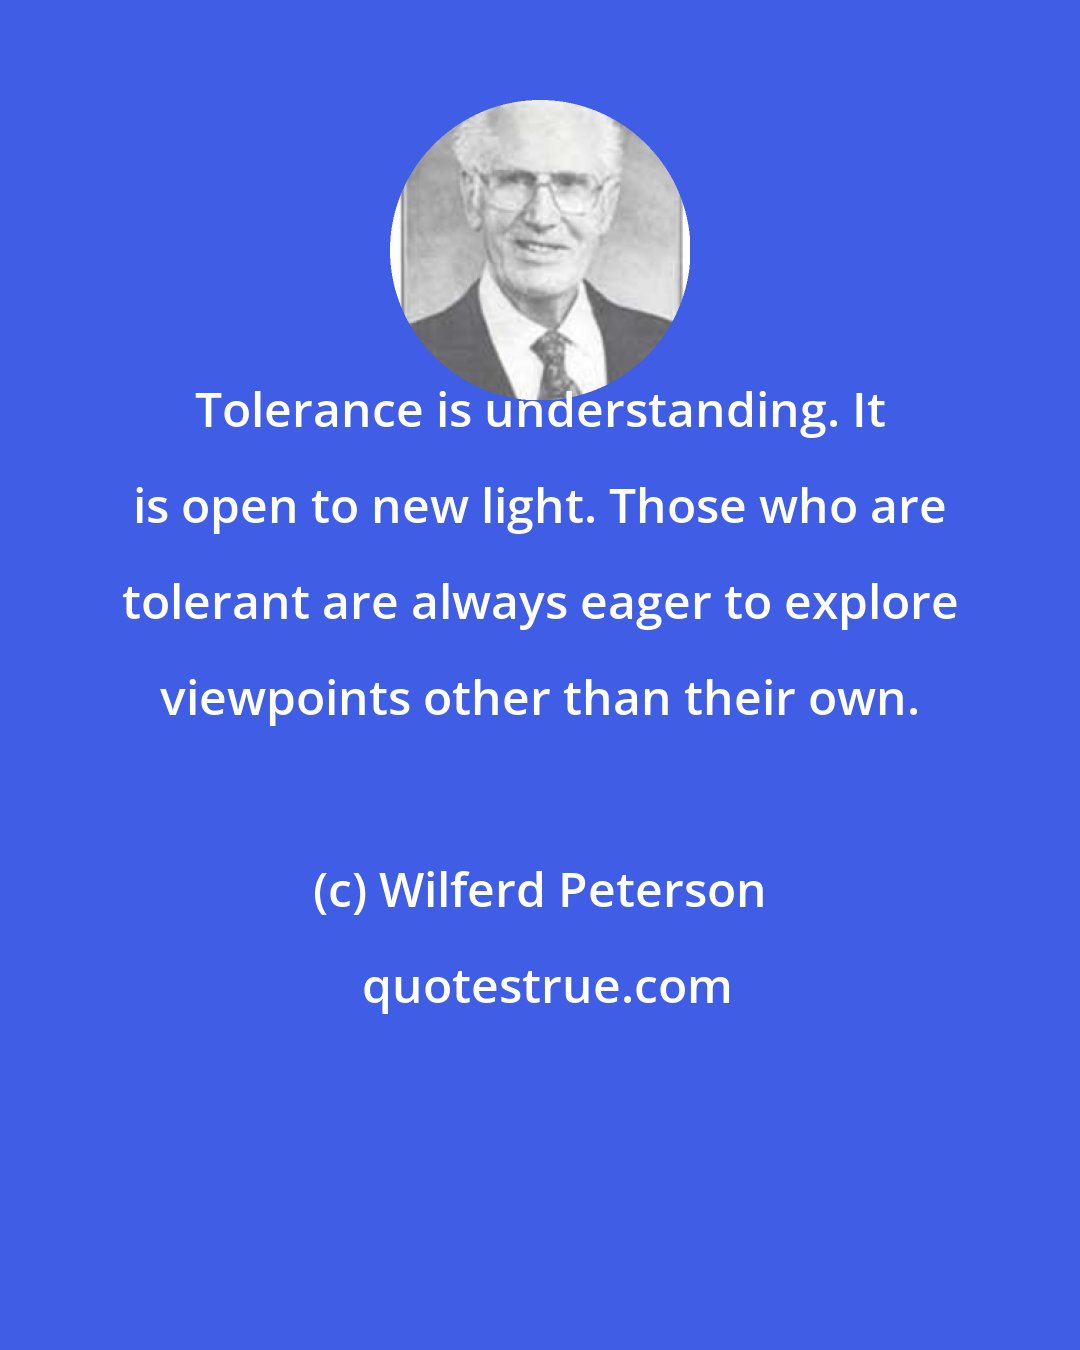 Wilferd Peterson: Tolerance is understanding. It is open to new light. Those who are tolerant are always eager to explore viewpoints other than their own.